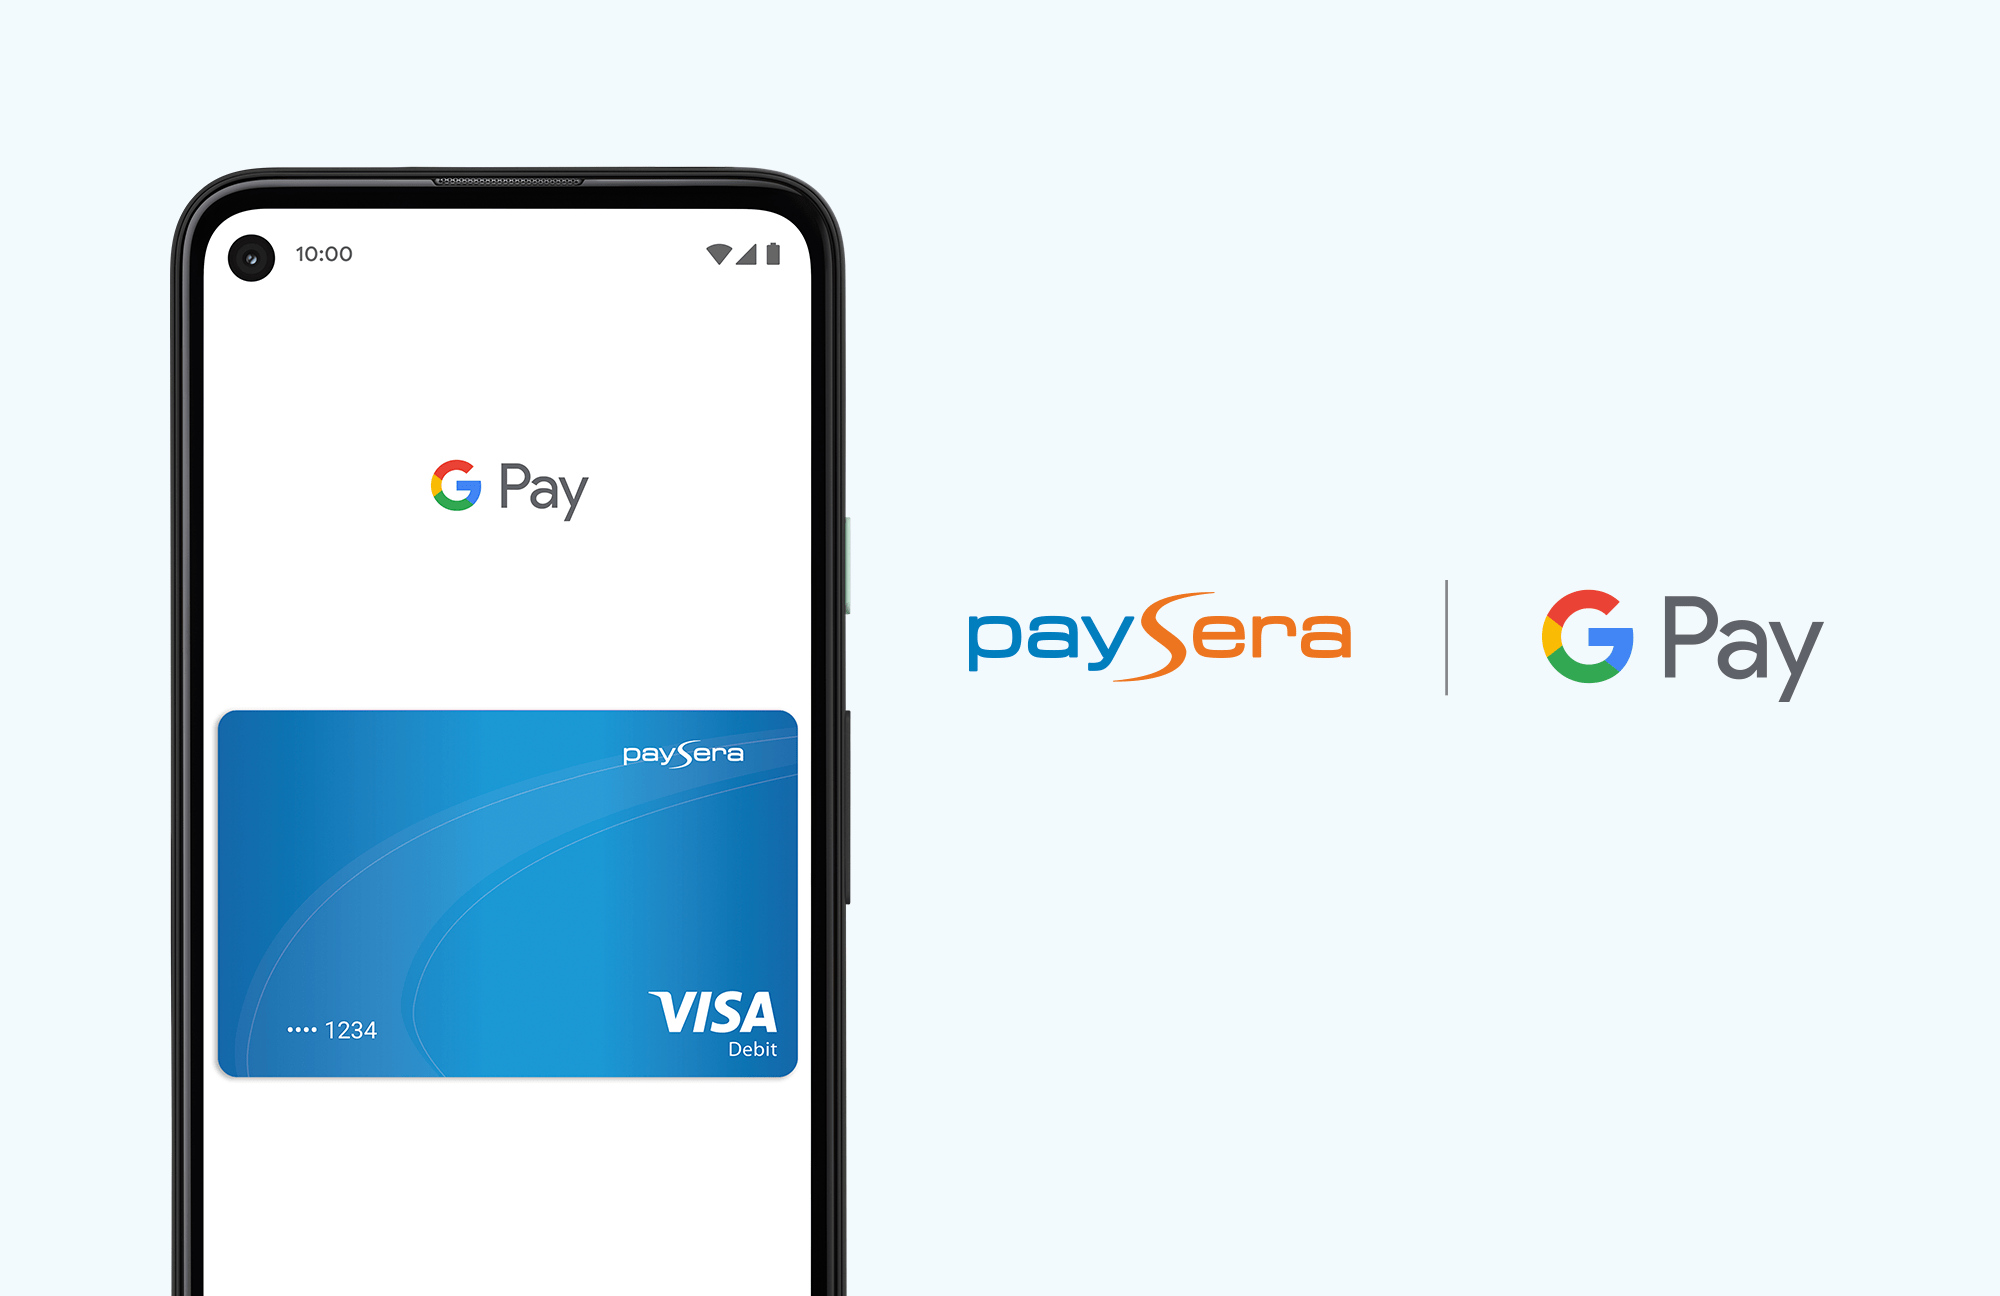 TV station tie commentator Does Paysera Visa card support Google Pay and Samsung Pay?